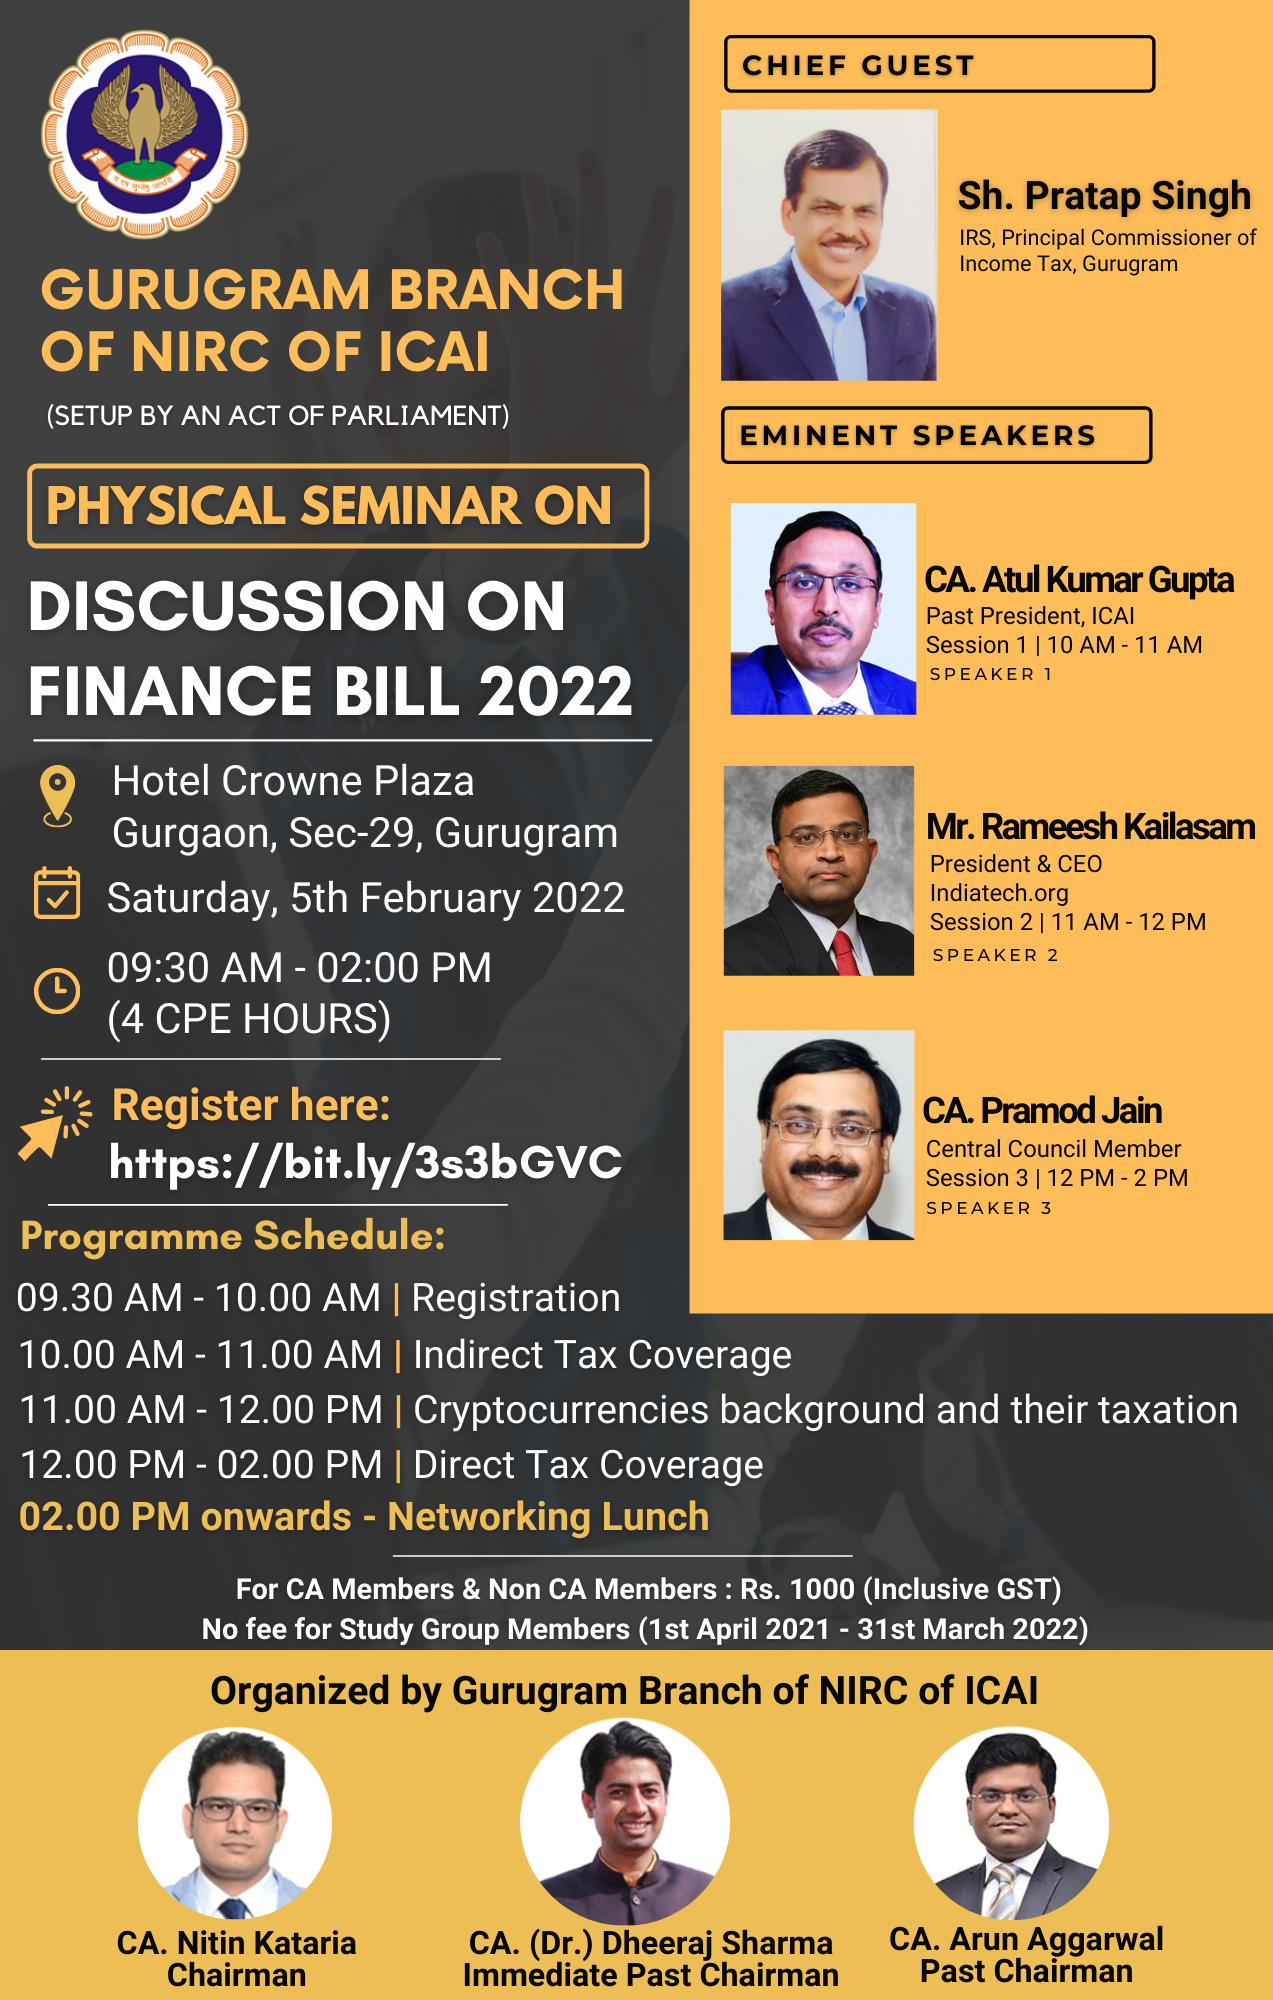 Seminar on Discussion on Finance Bill 2022